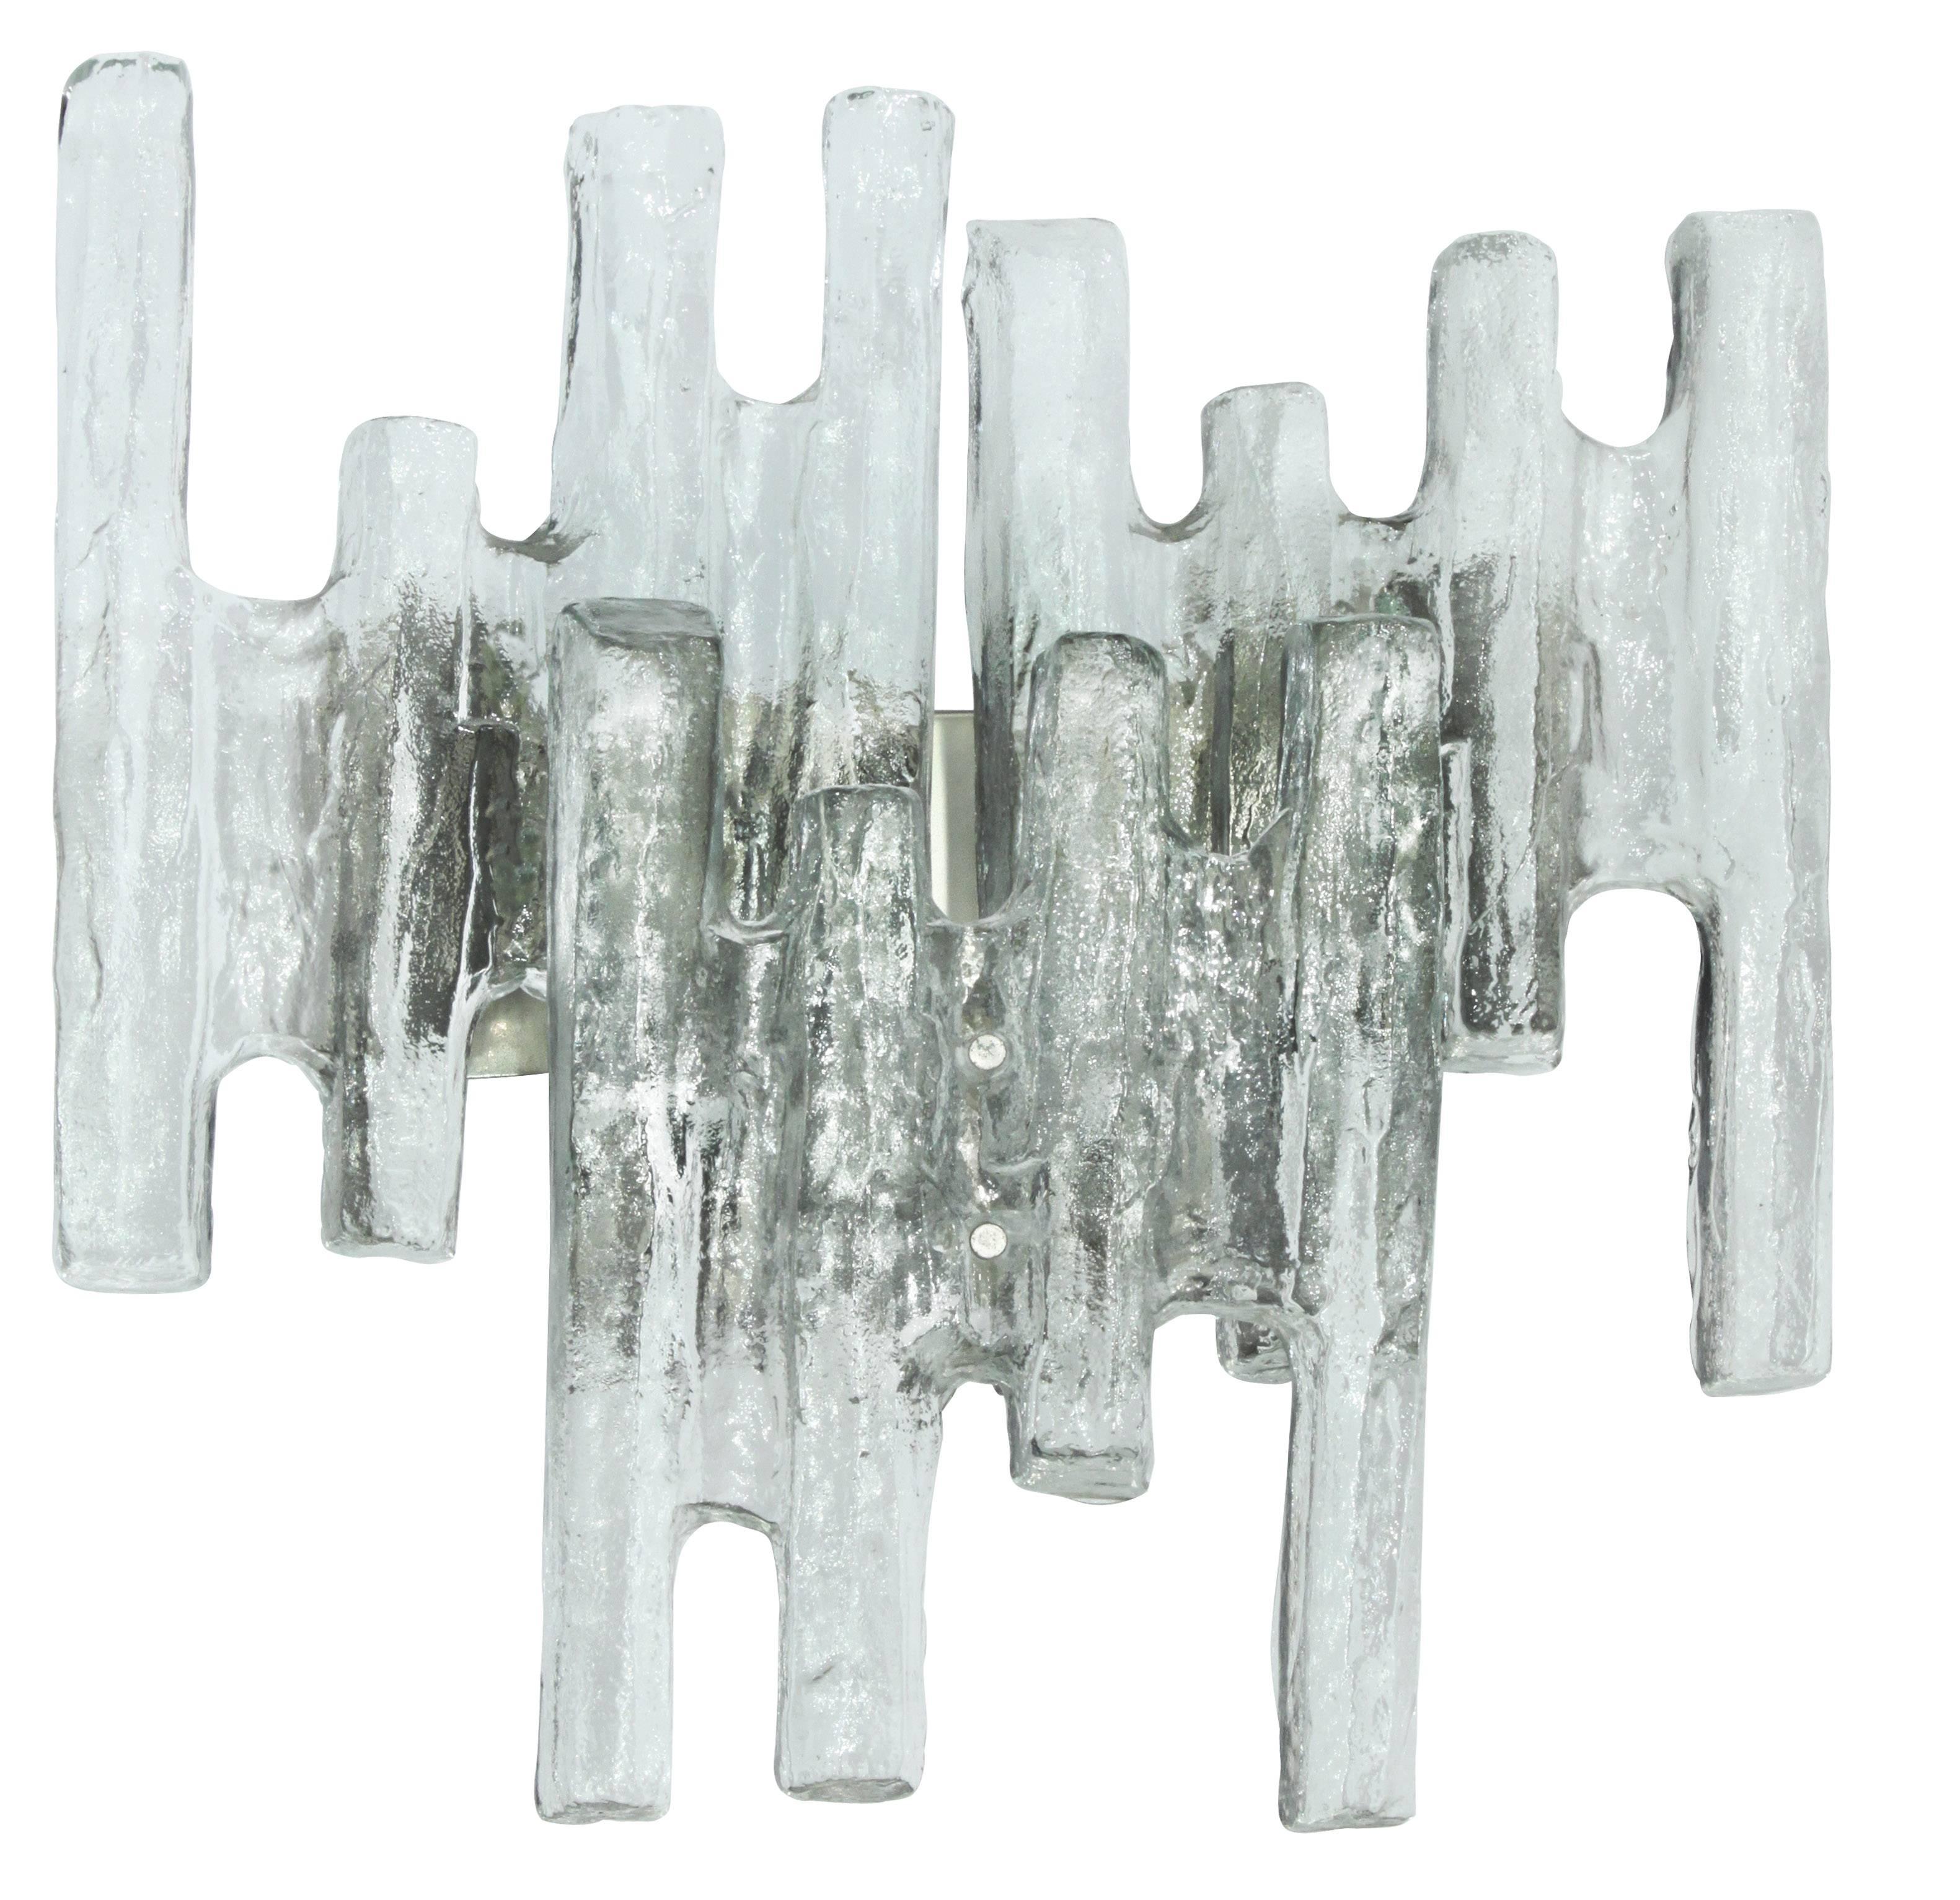 Pair of large textured glass Icicle sconces by Kalmar, Austria, 1960s.